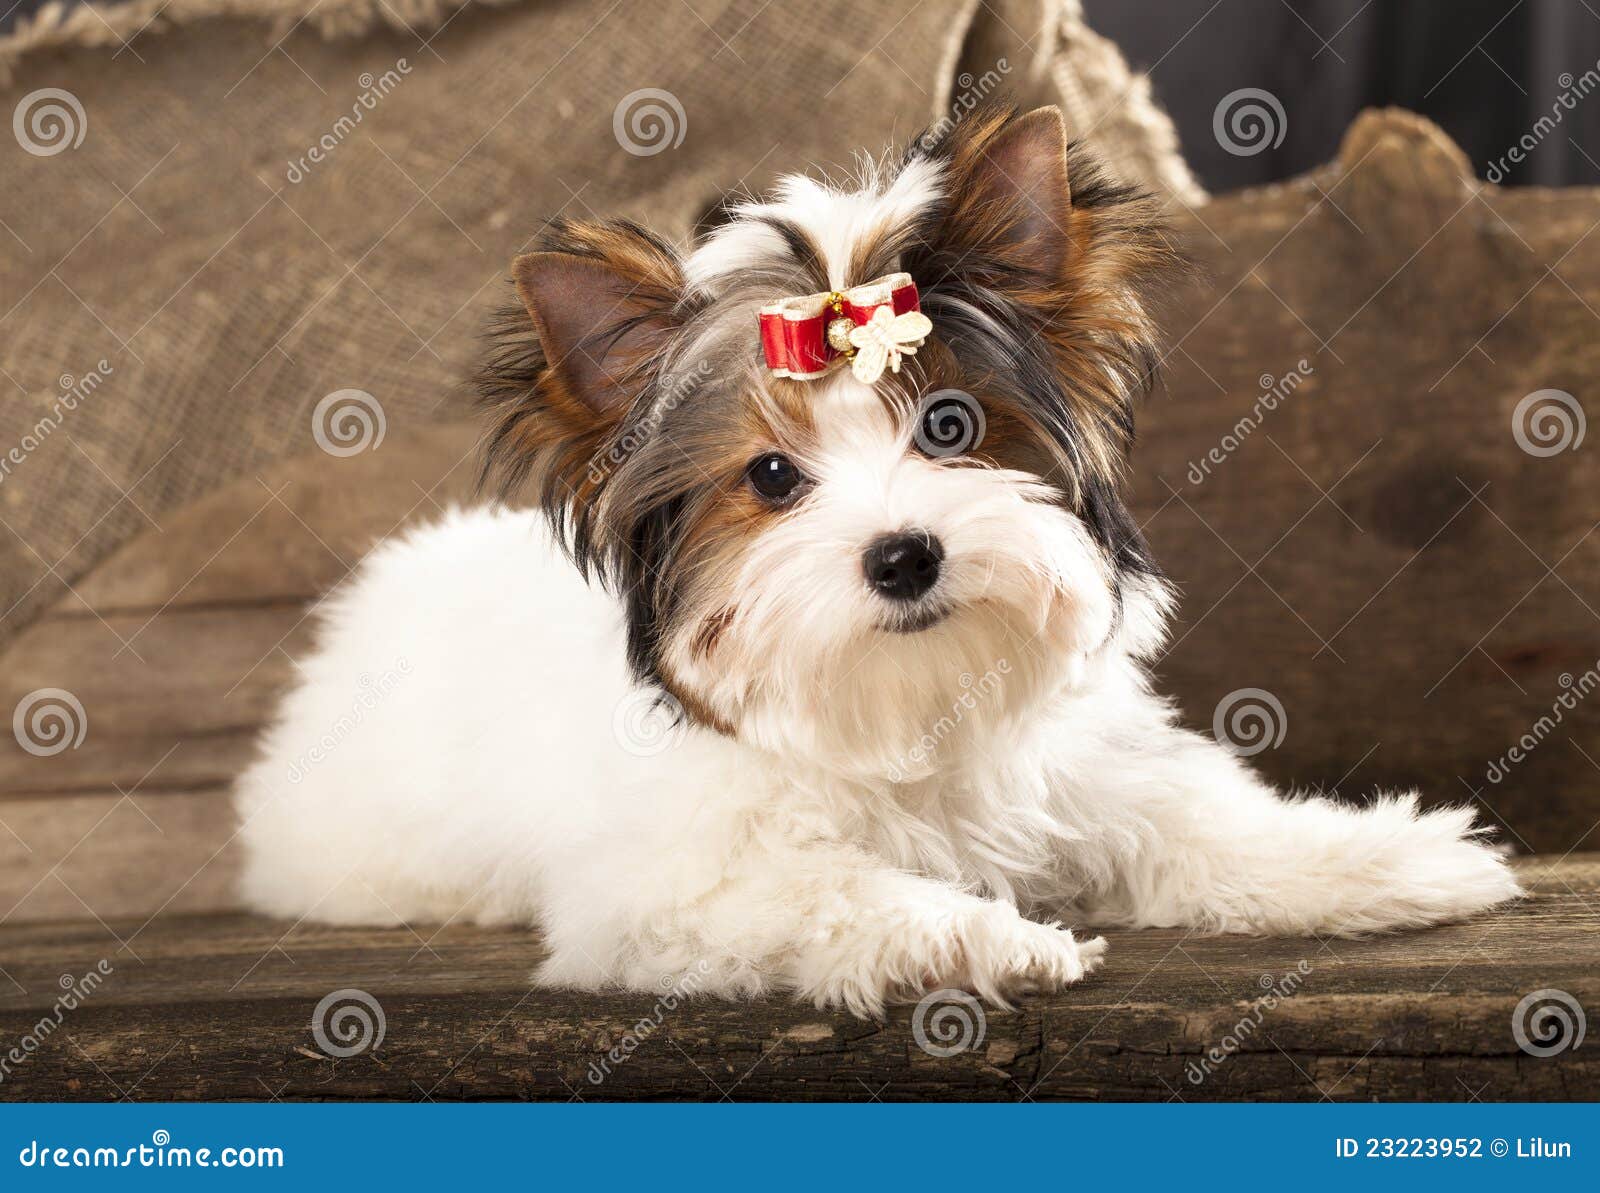 Biewer-york terrier puppy stock photo. Image of affectionate - 23223952